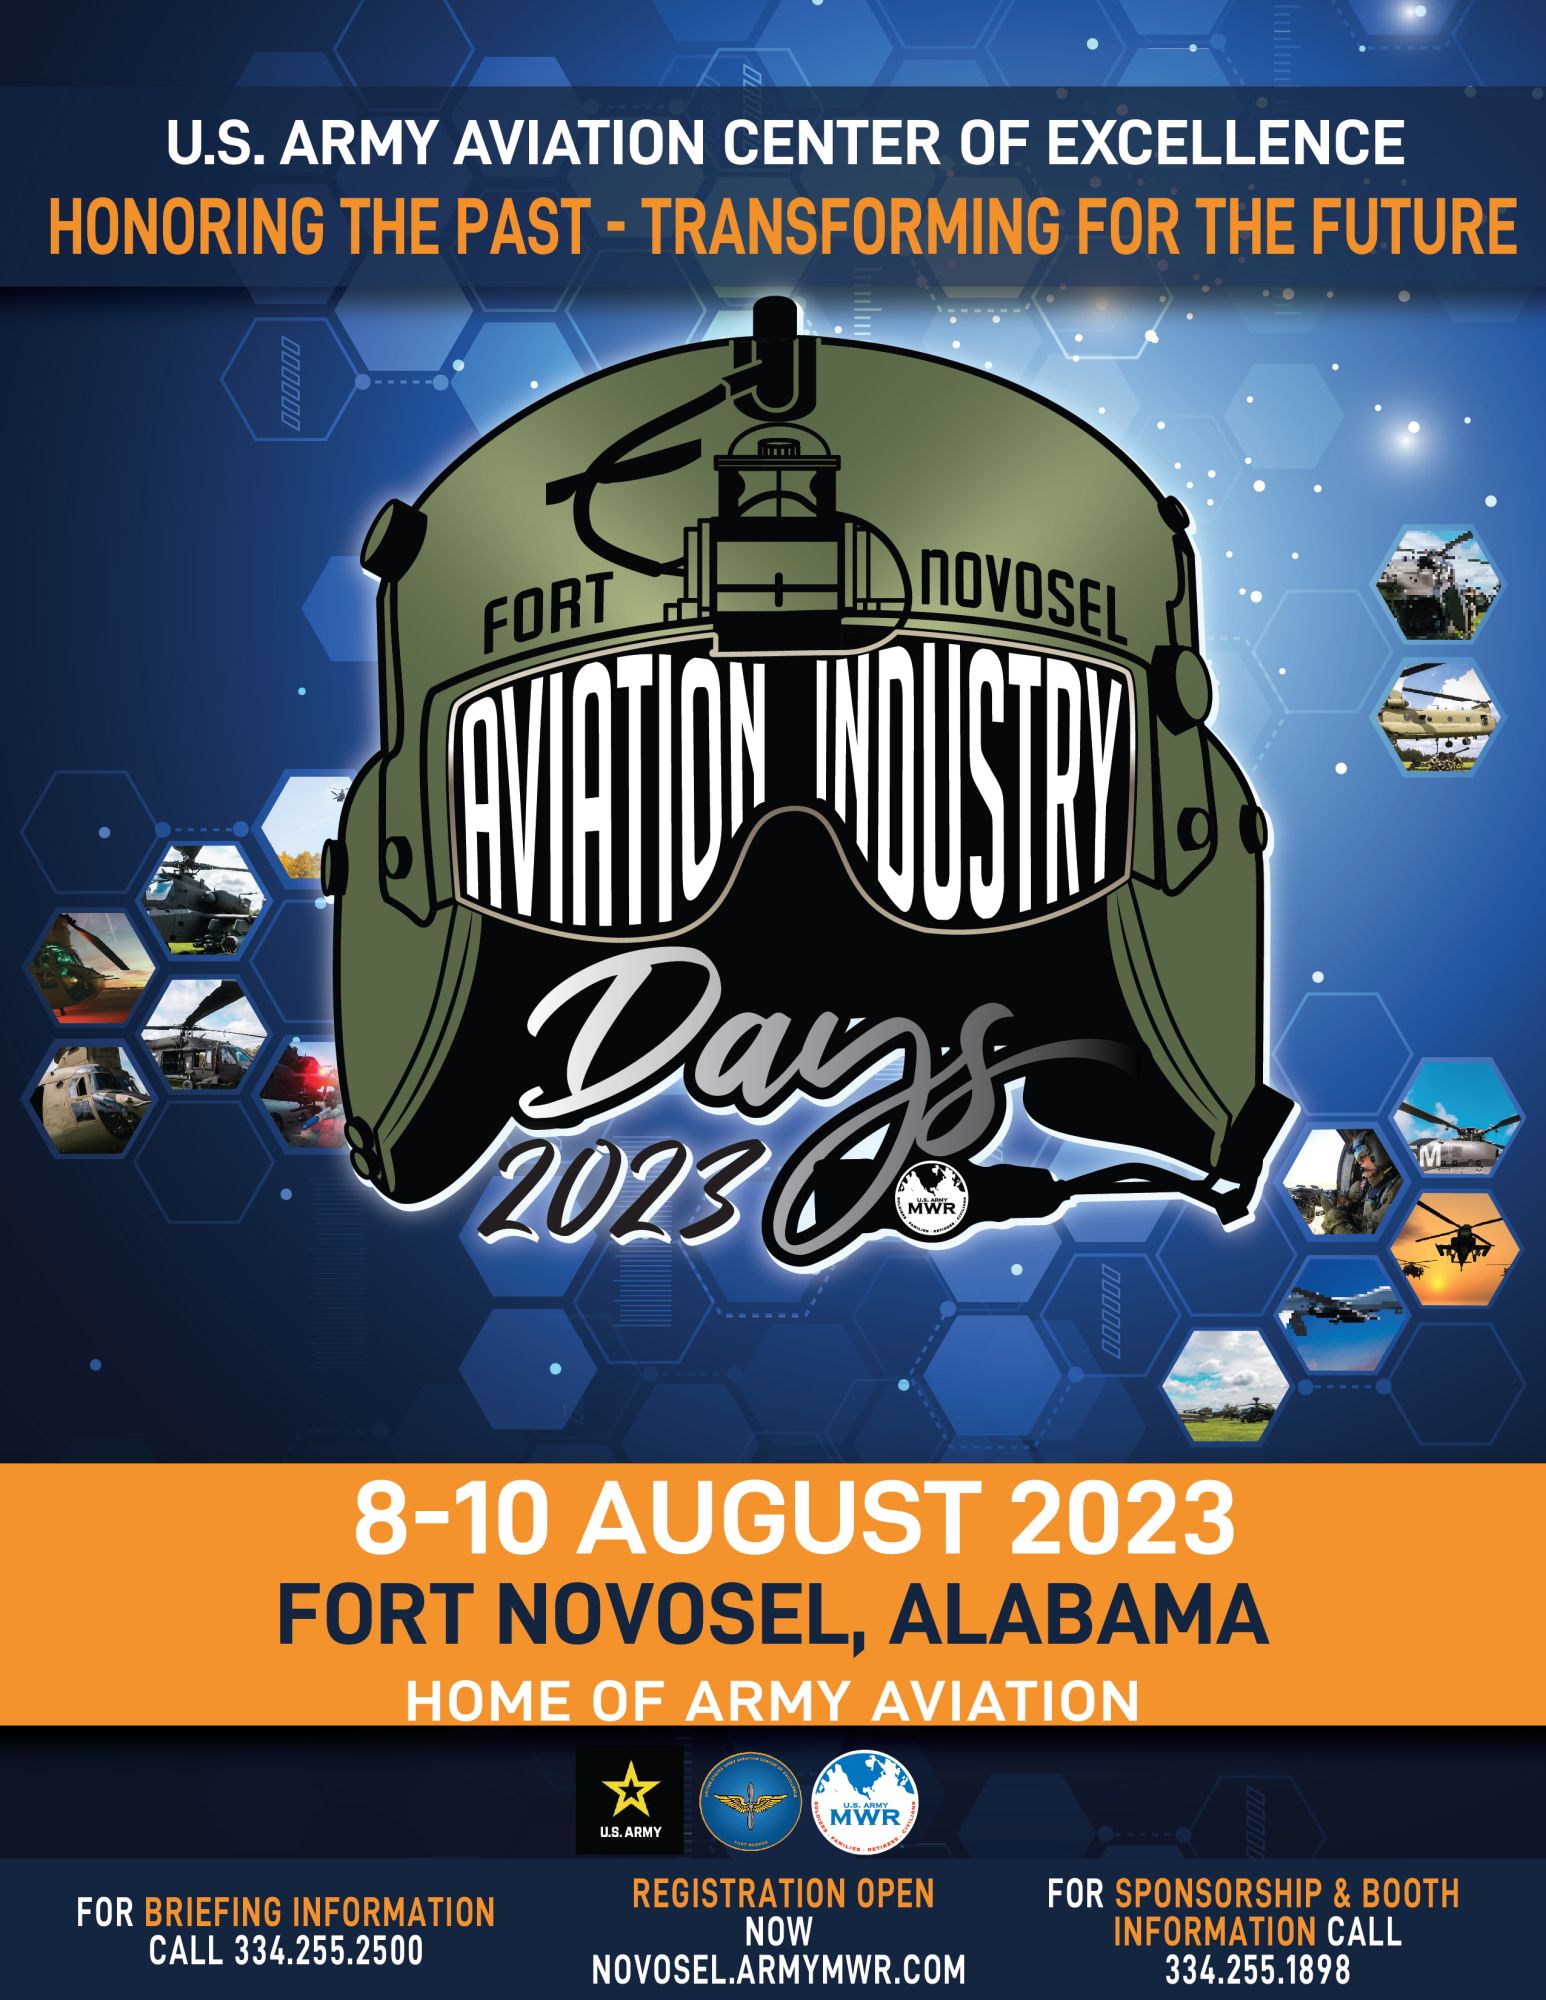 Aviation Industry Days 2023 Ft. Novosel US Army MWR